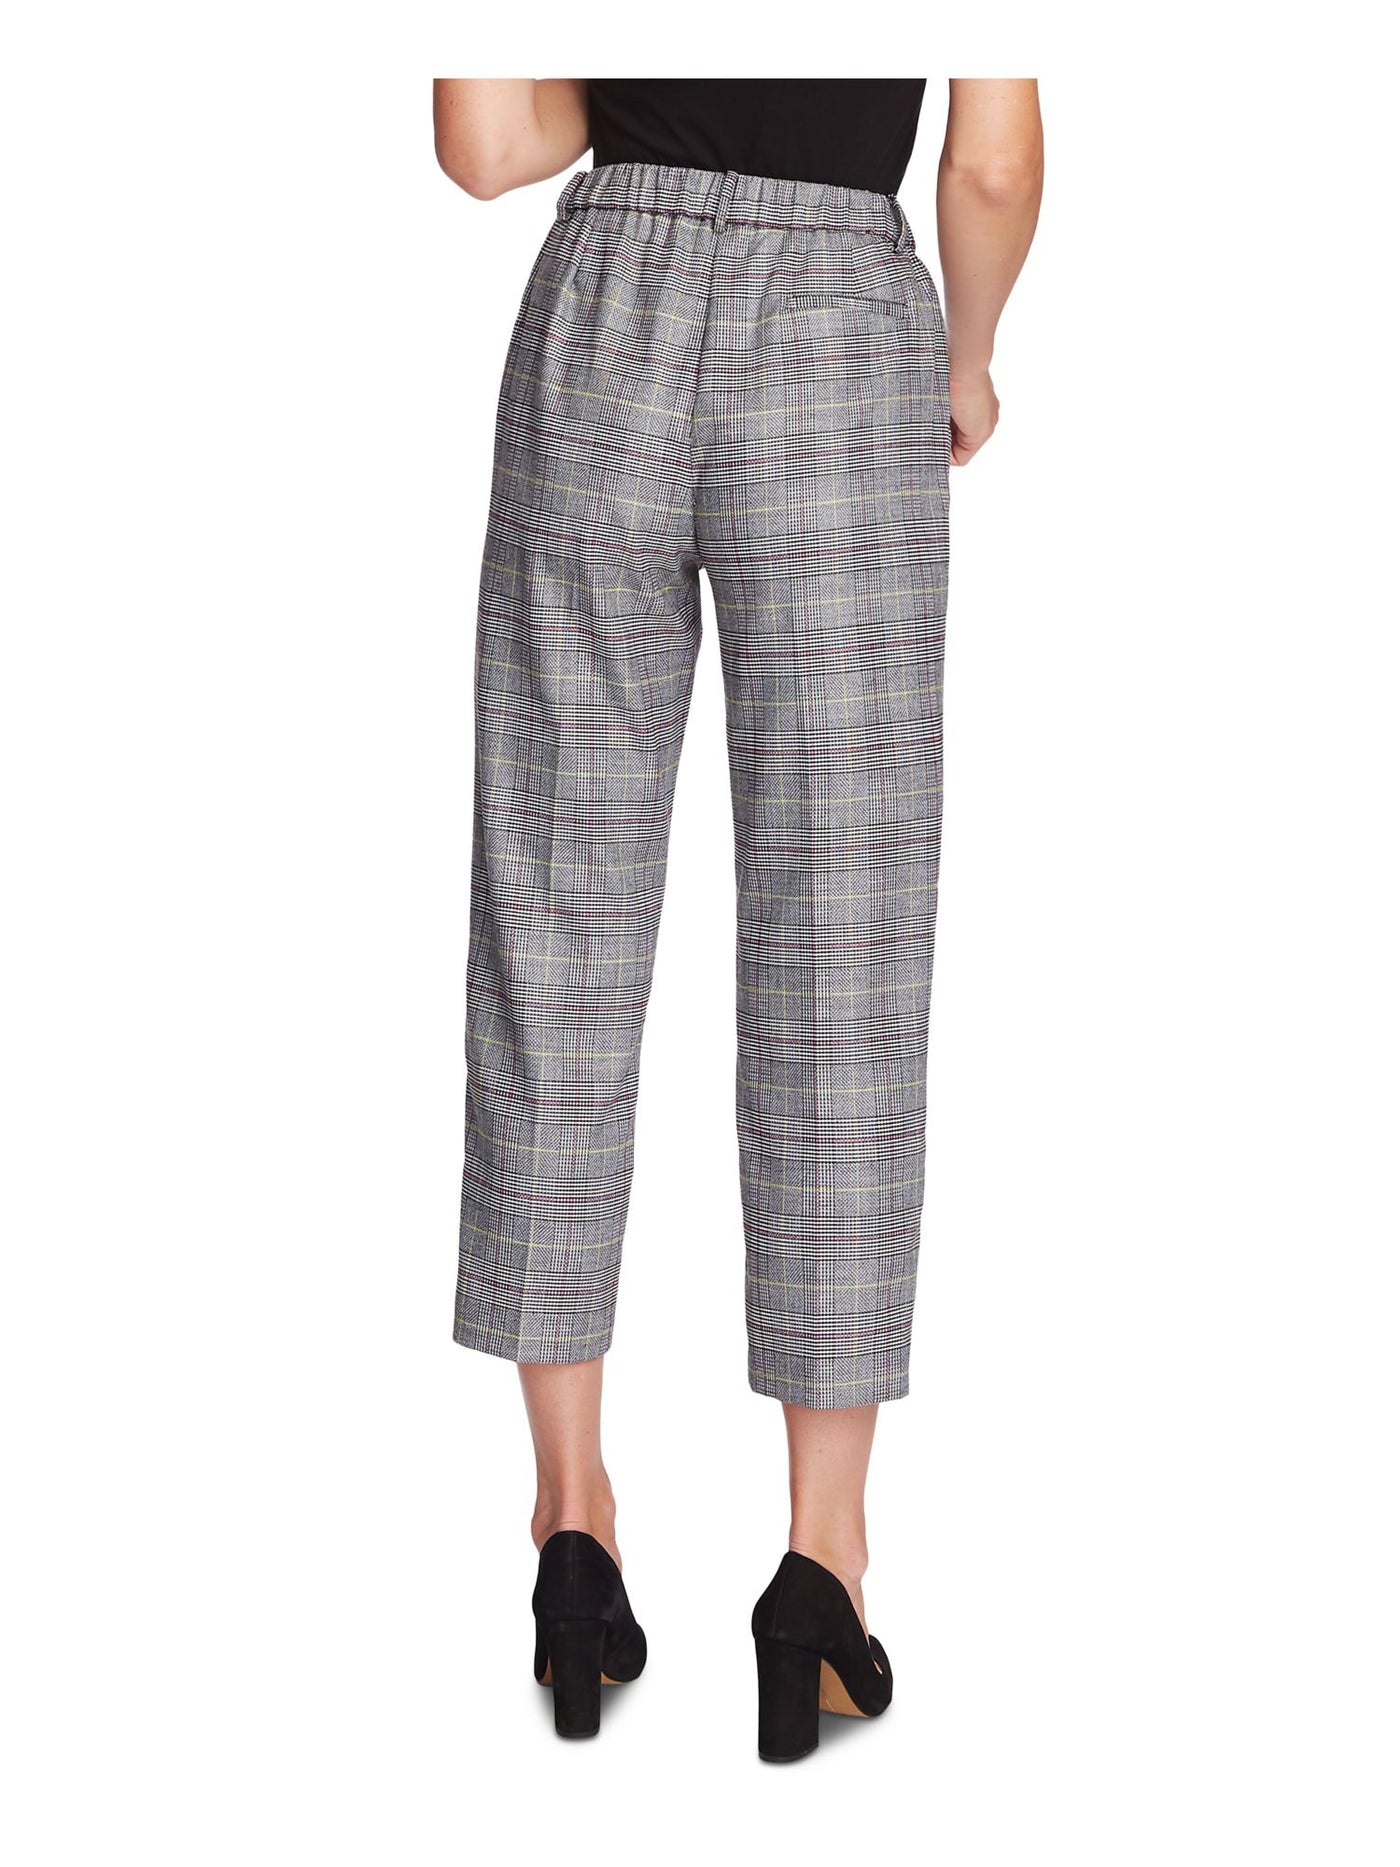 VINCE CAMUTO Womens Green Plaid Wear To Work Straight leg Pants 6